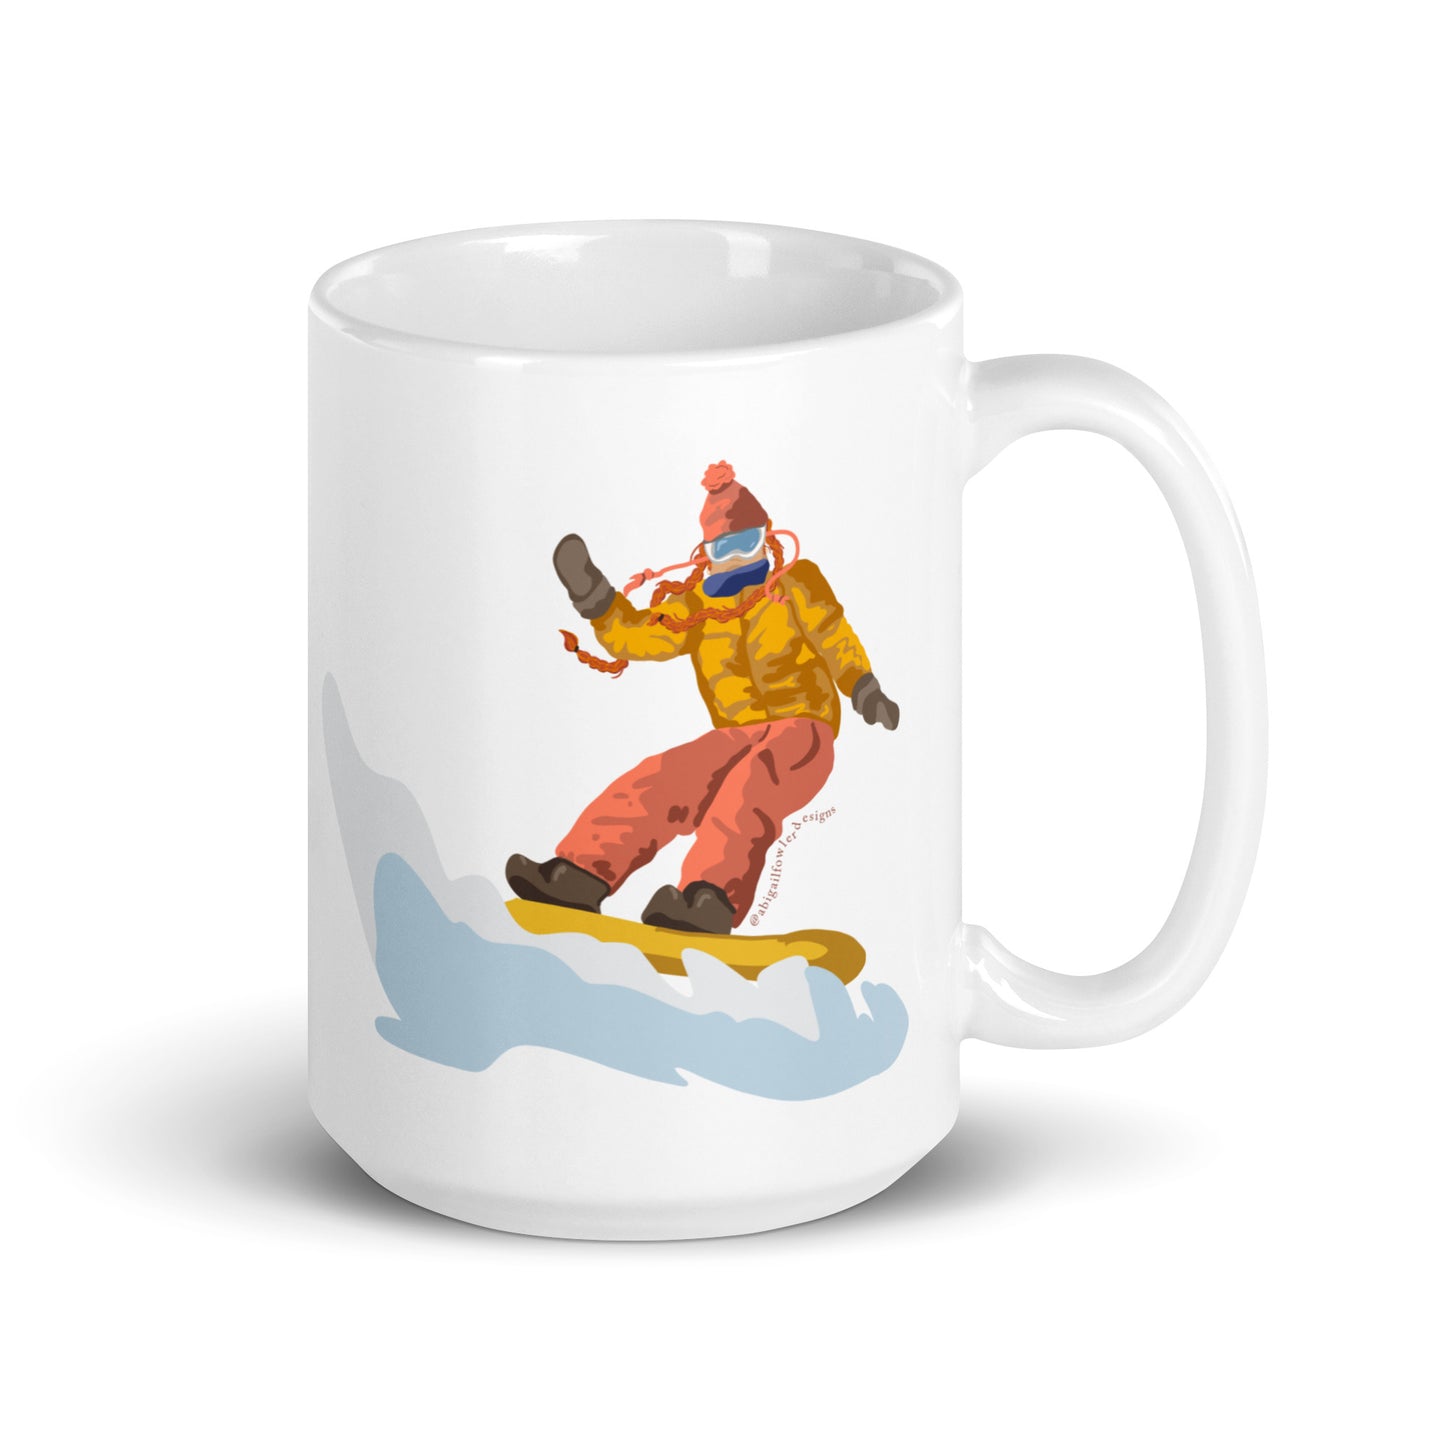 Tan and Red Head in Braids Snowboarder White glossy mug